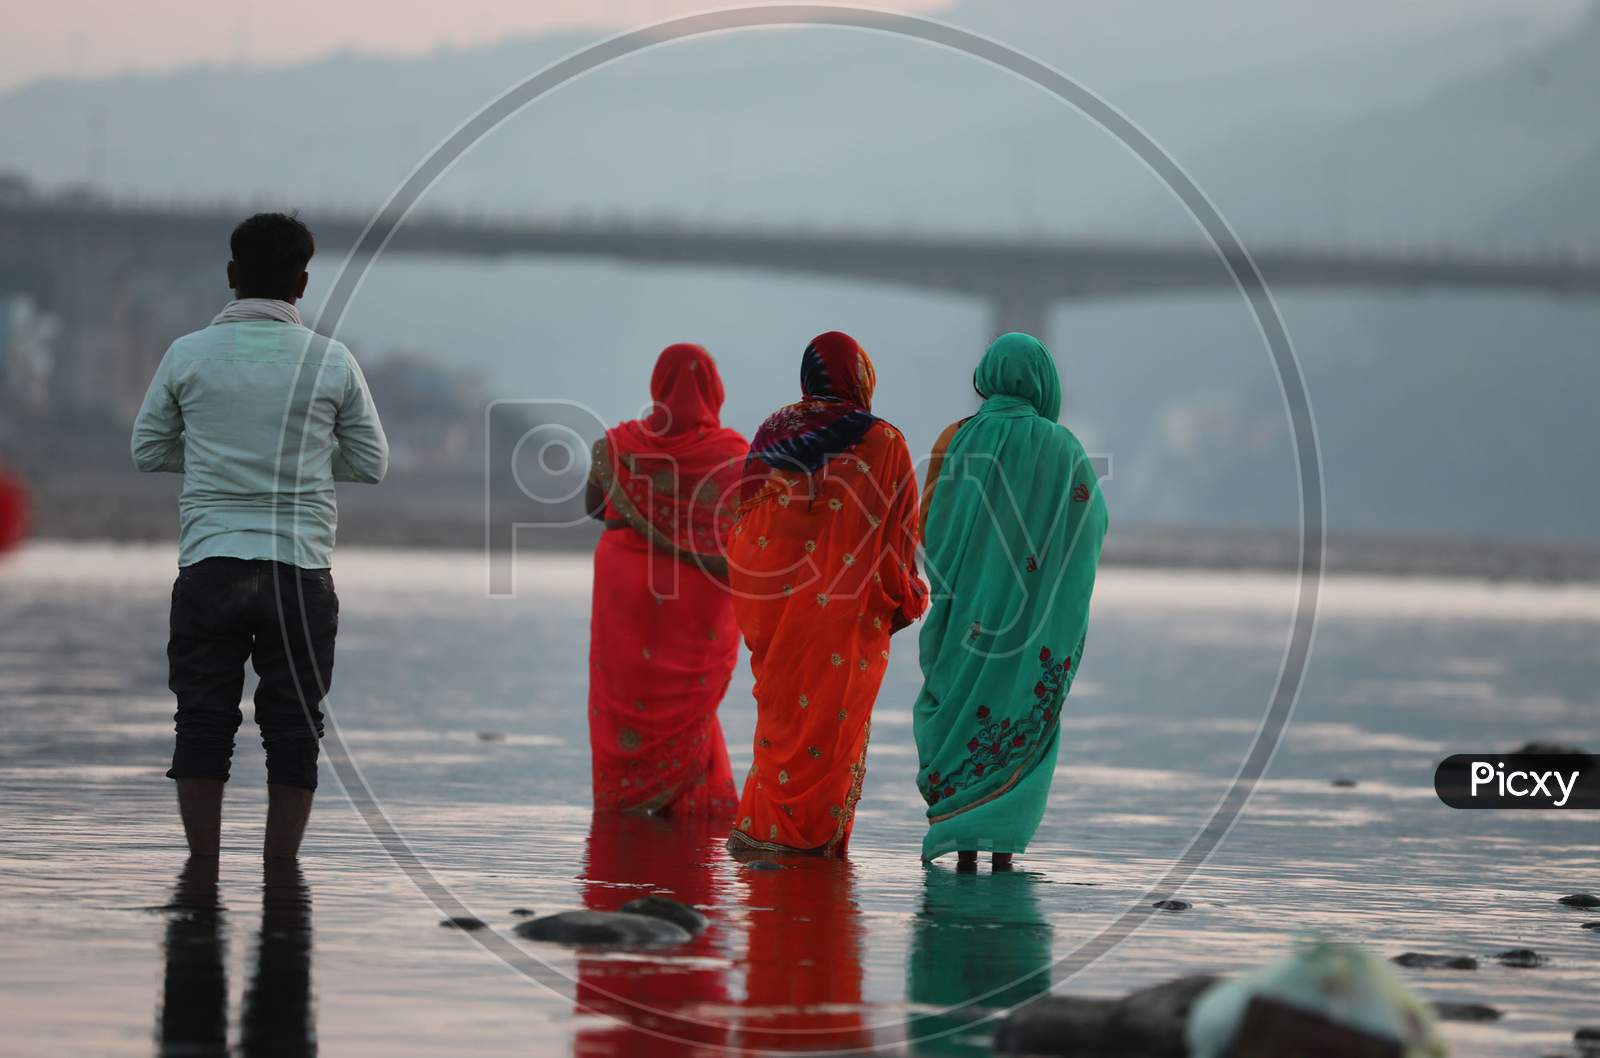 Devotees perform rituals during 'Chhath Puja' celebrations, on the banks of River Tawi in Jammu, Saturday, Nov. 21, 2020.